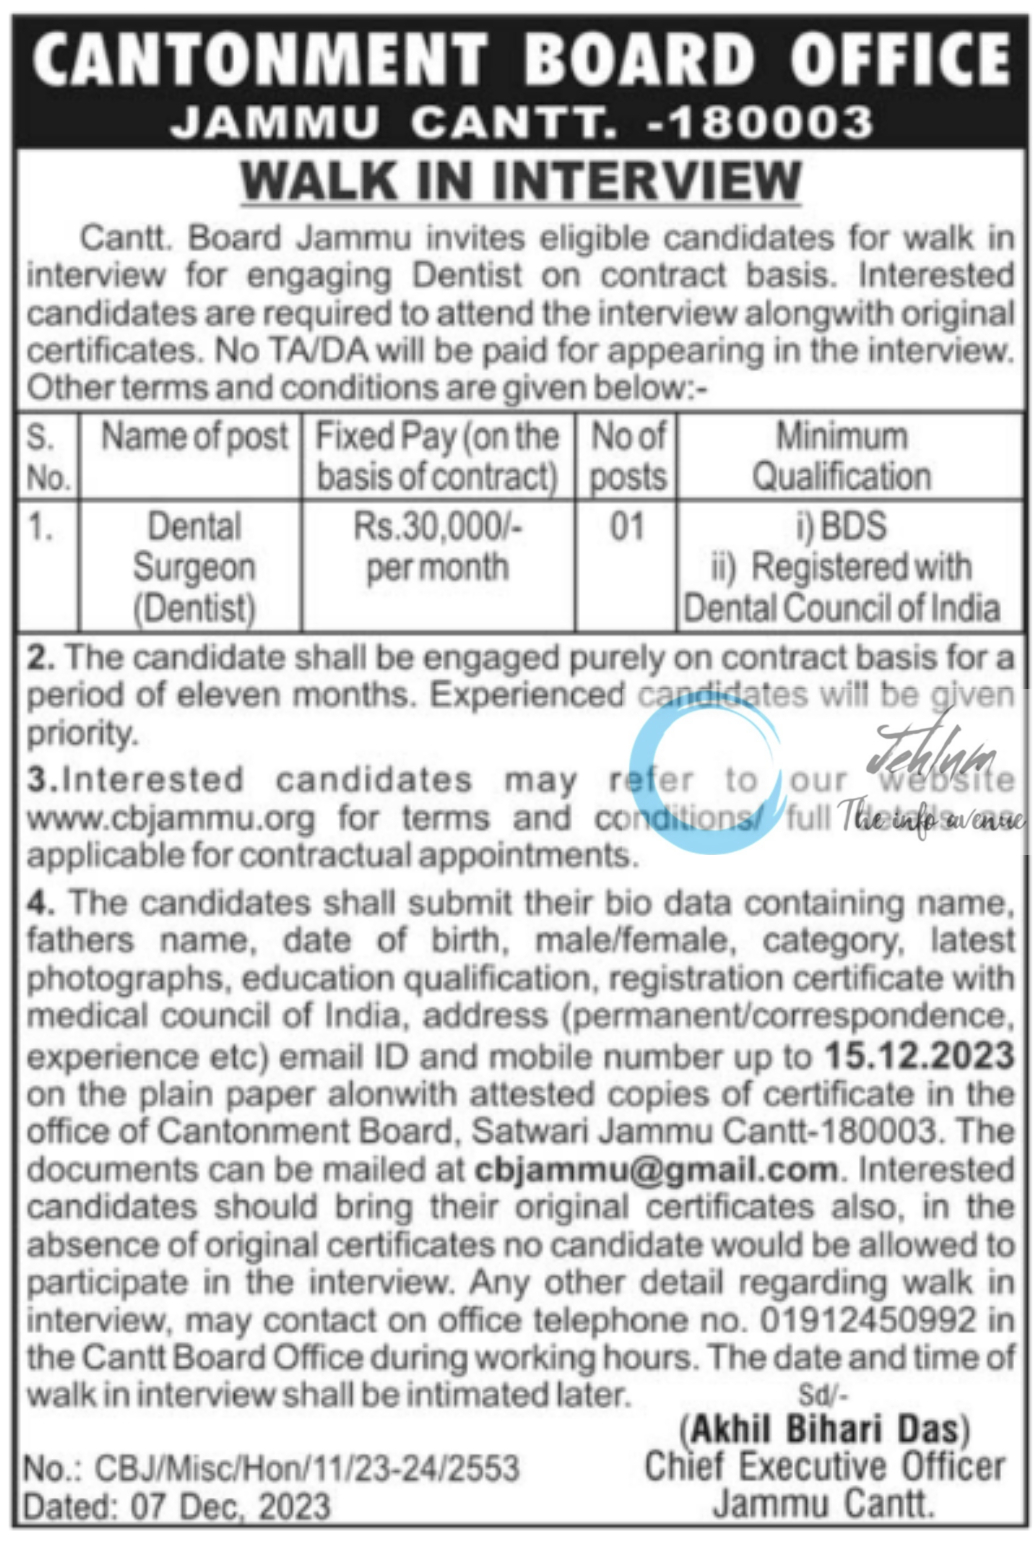 CANTONMENT BOARD OFFICE JAMMU WALK IN INTERVIEW 2023